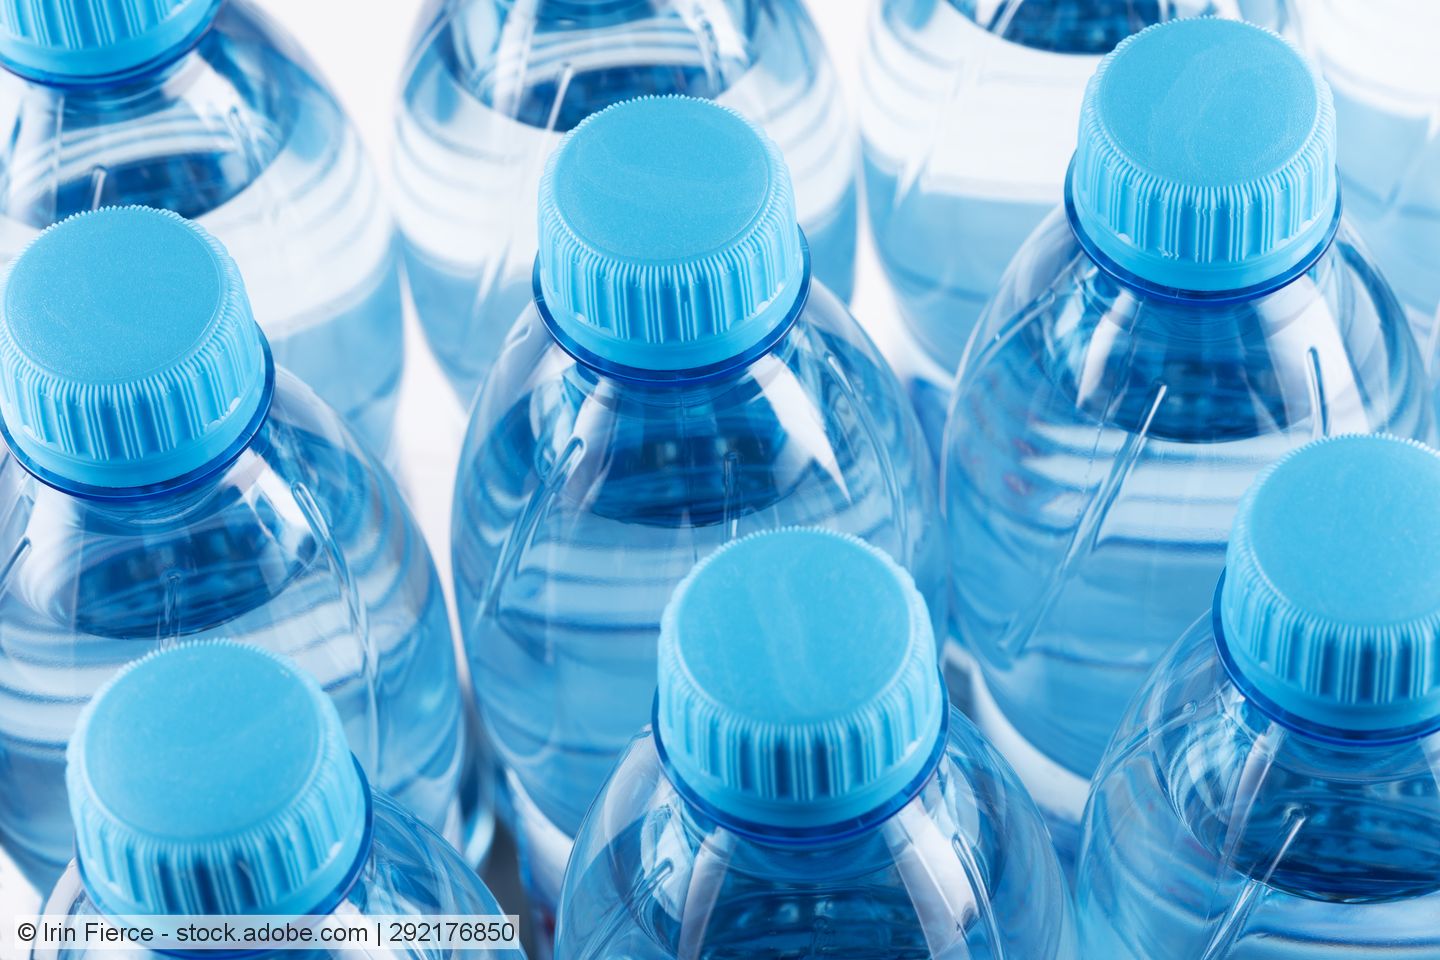 Danone aims for 100 per cent rPET <br>in European water bottles